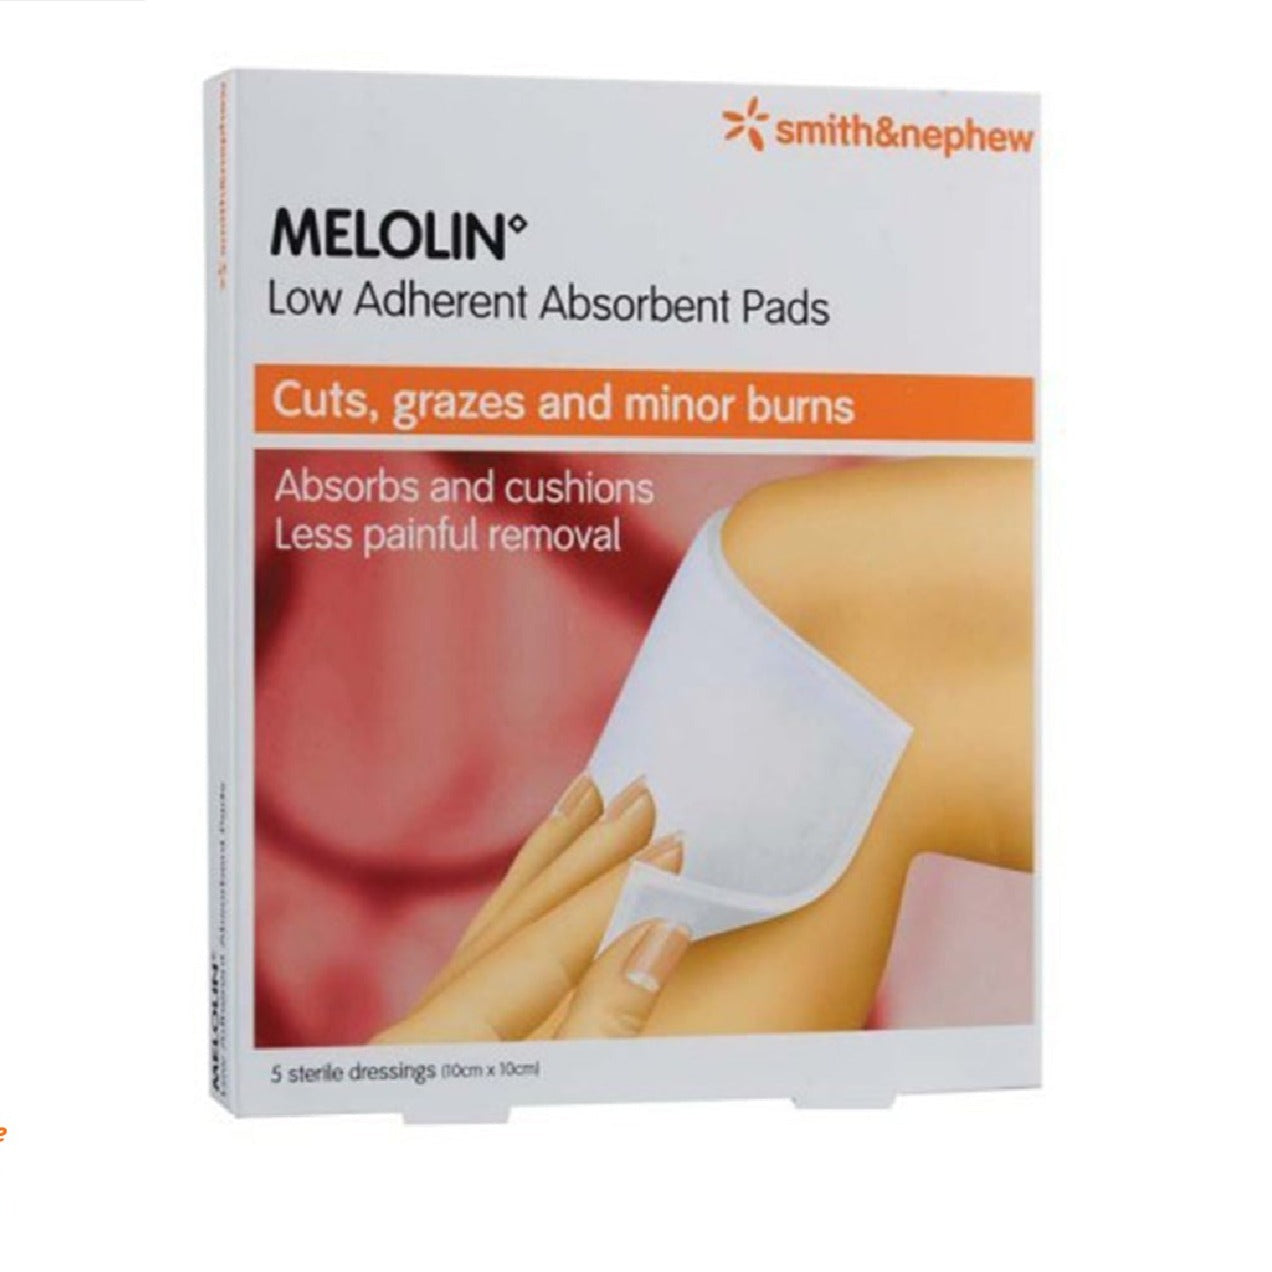 SMITH & NEPHEW MELOLIN LOW ADHERENT ABSORBENT PADS 10cm x 10cm x 5's